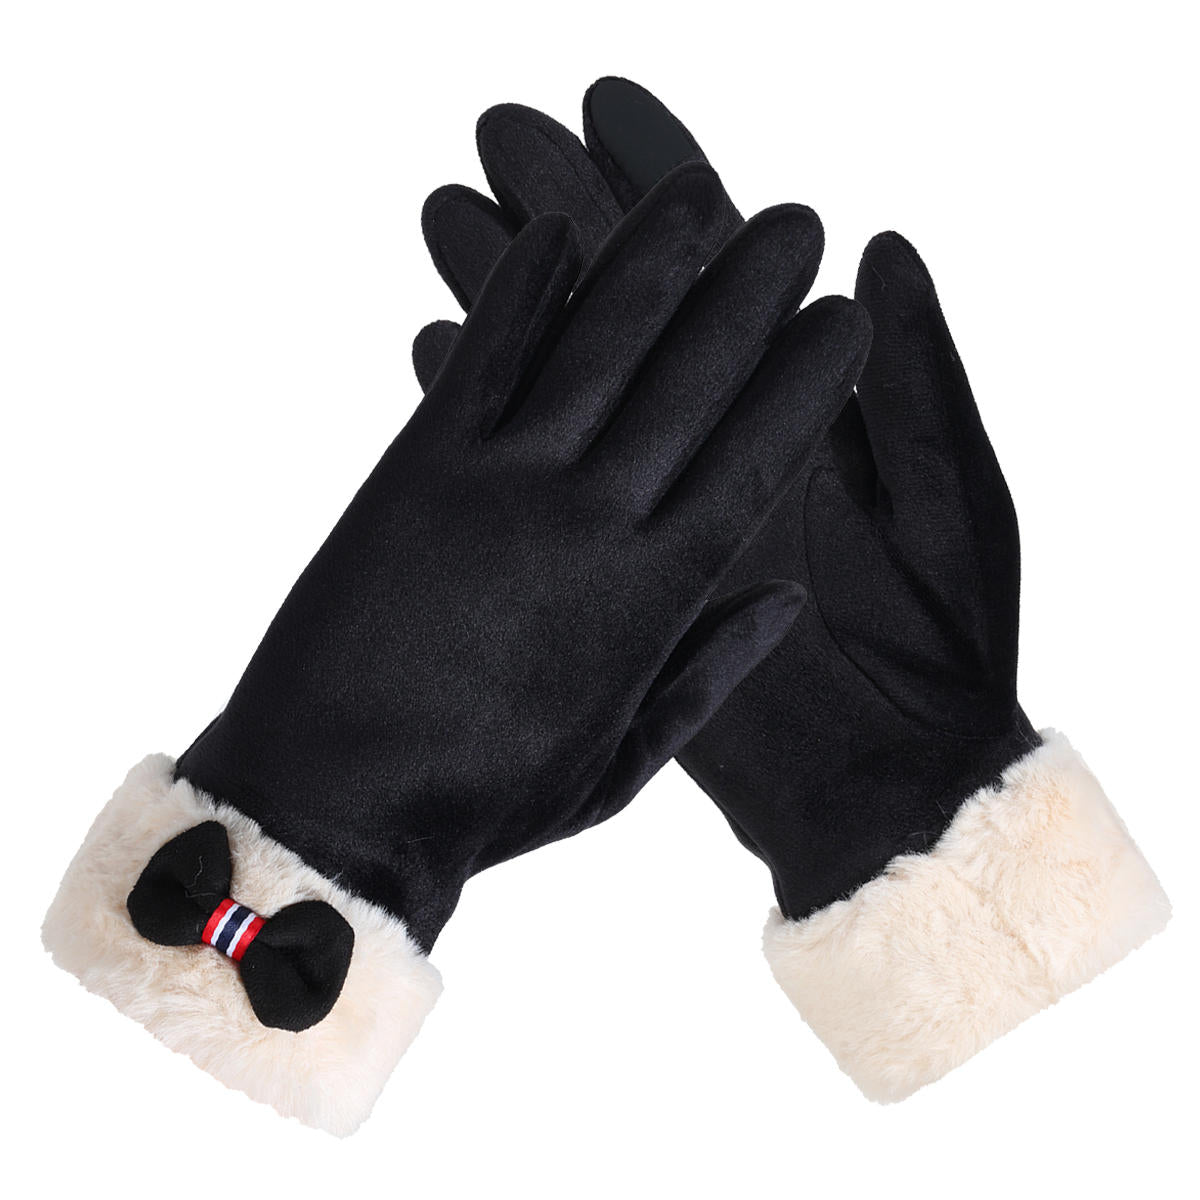 Womens Touch Screen Gloves Winter Windproof Thermal Warm Driving Skiing Full-finger Gloves